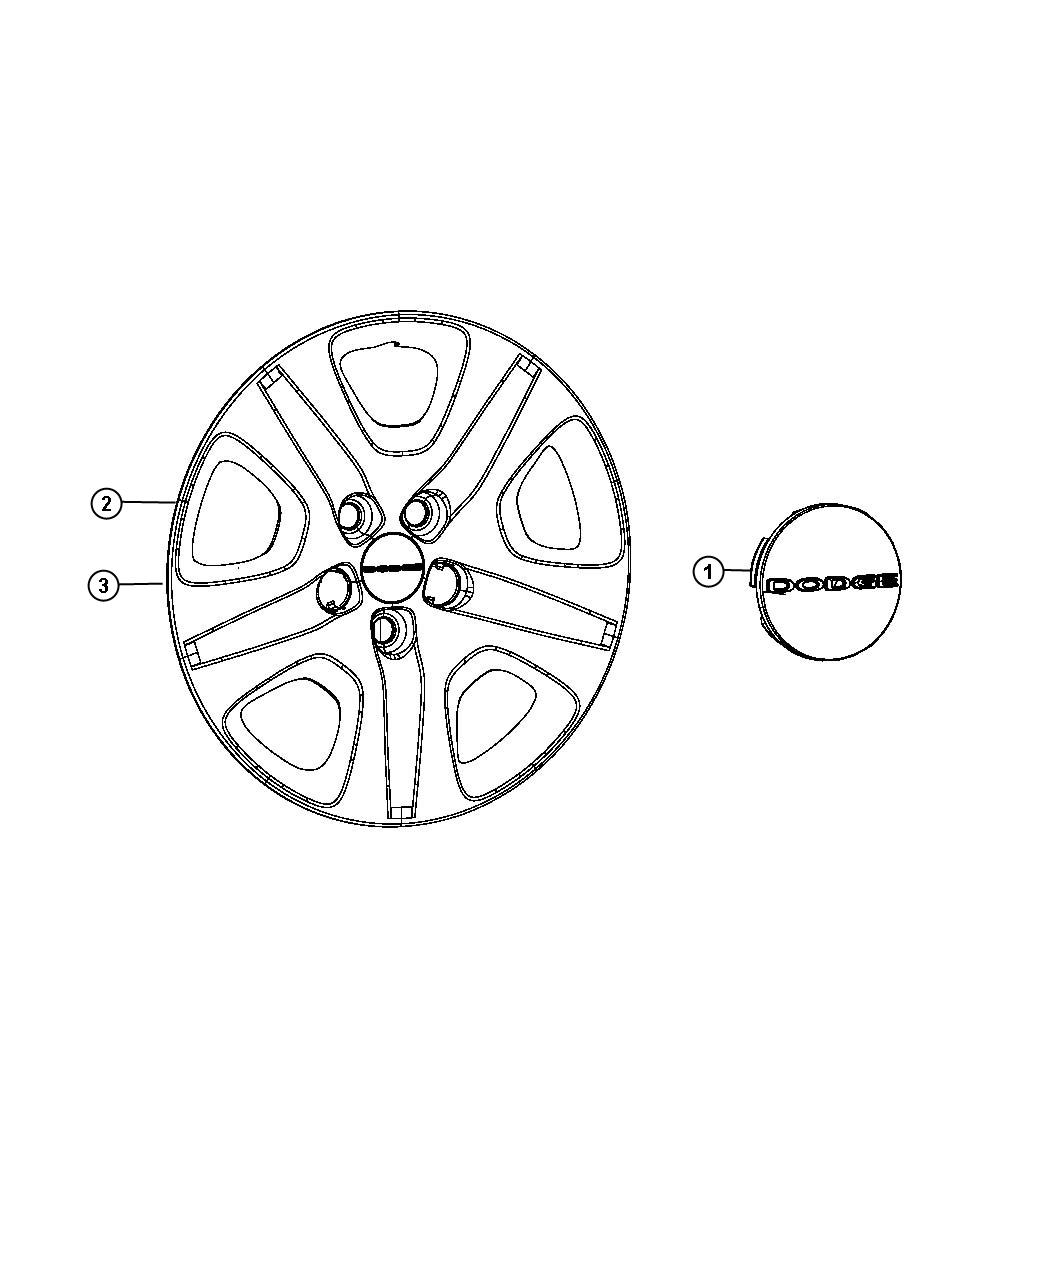 Wheel Covers and Caps. Diagram